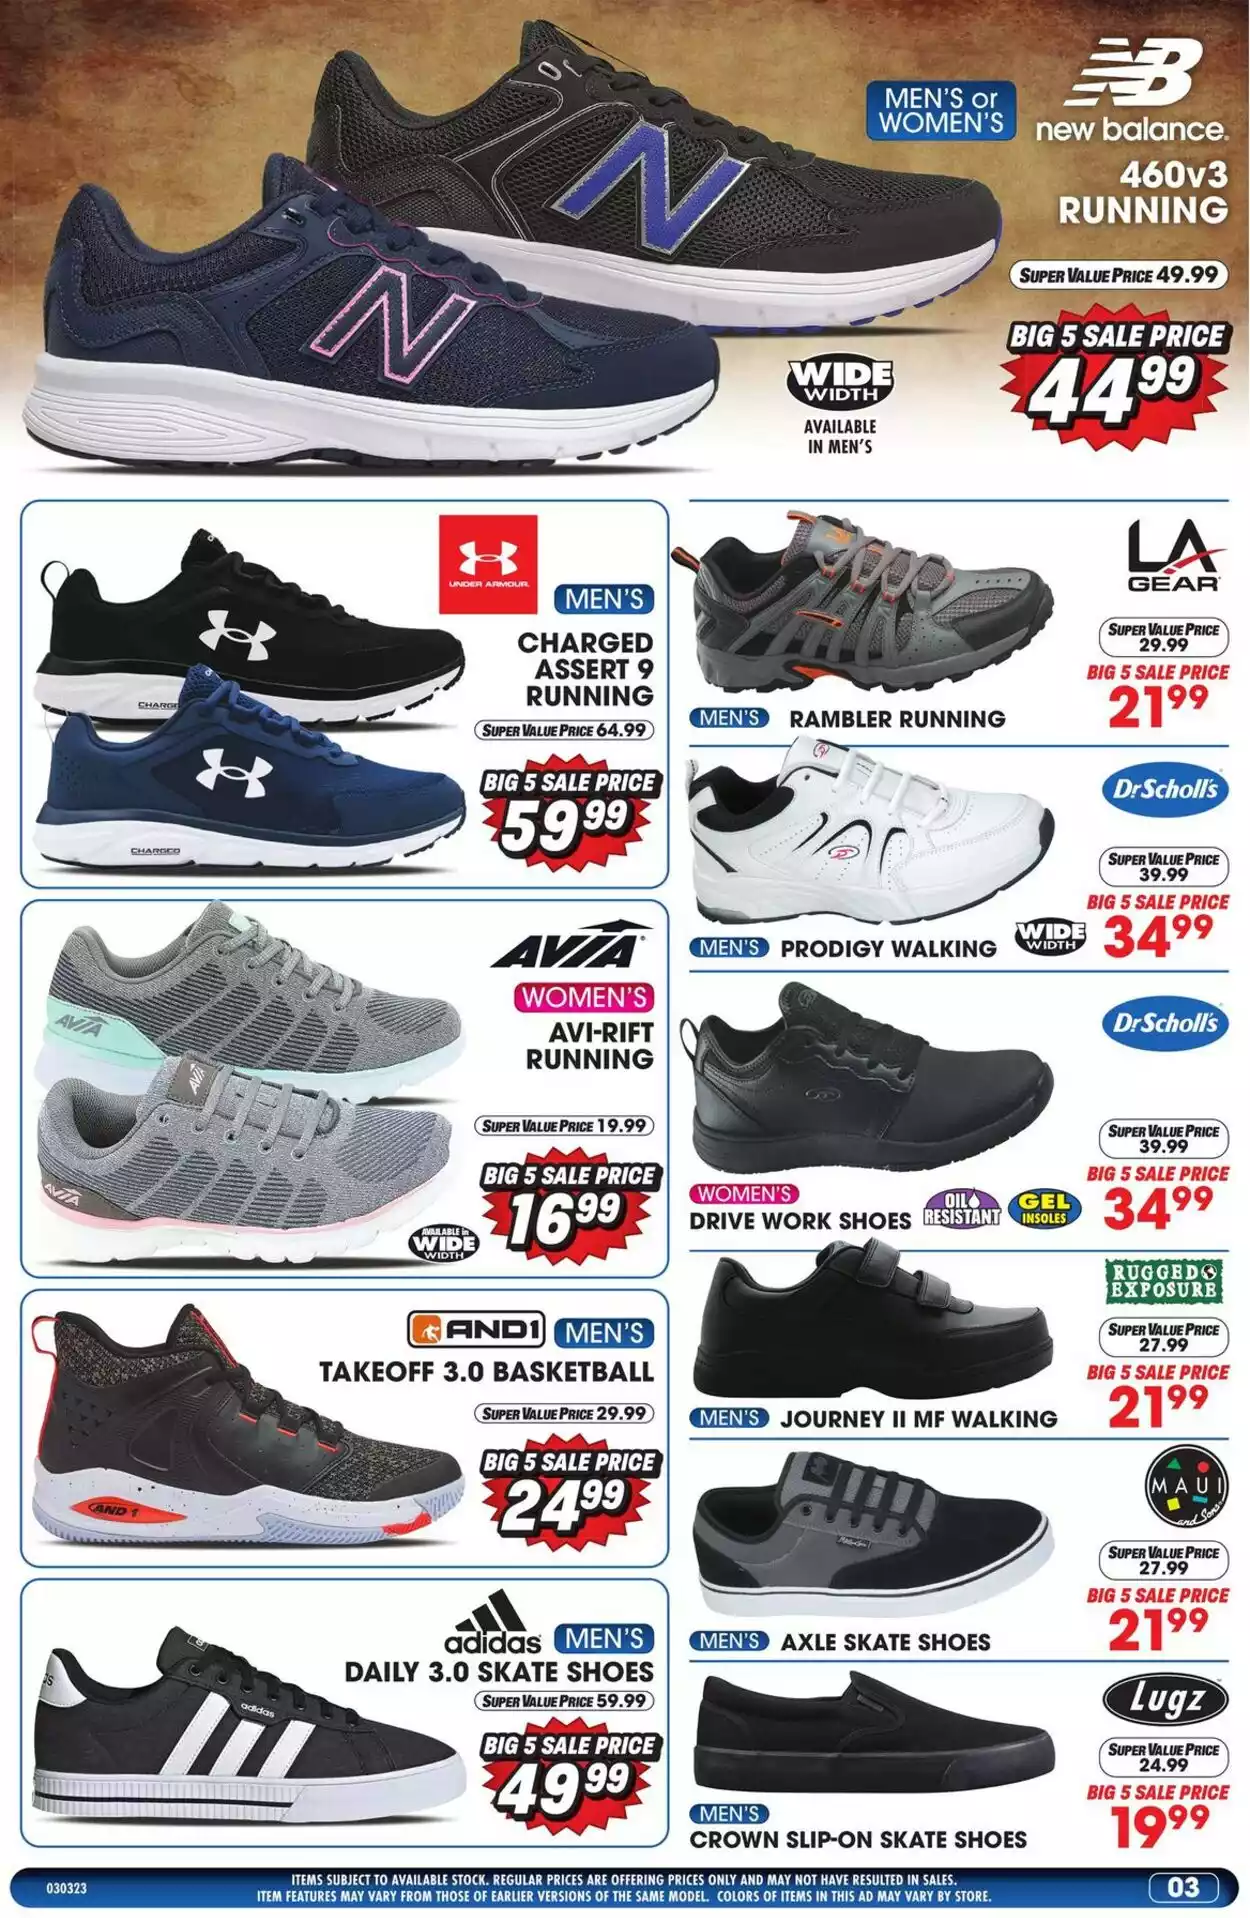 Big 5 Weekly Ad Preview for March 26 - April 1, 2023 4